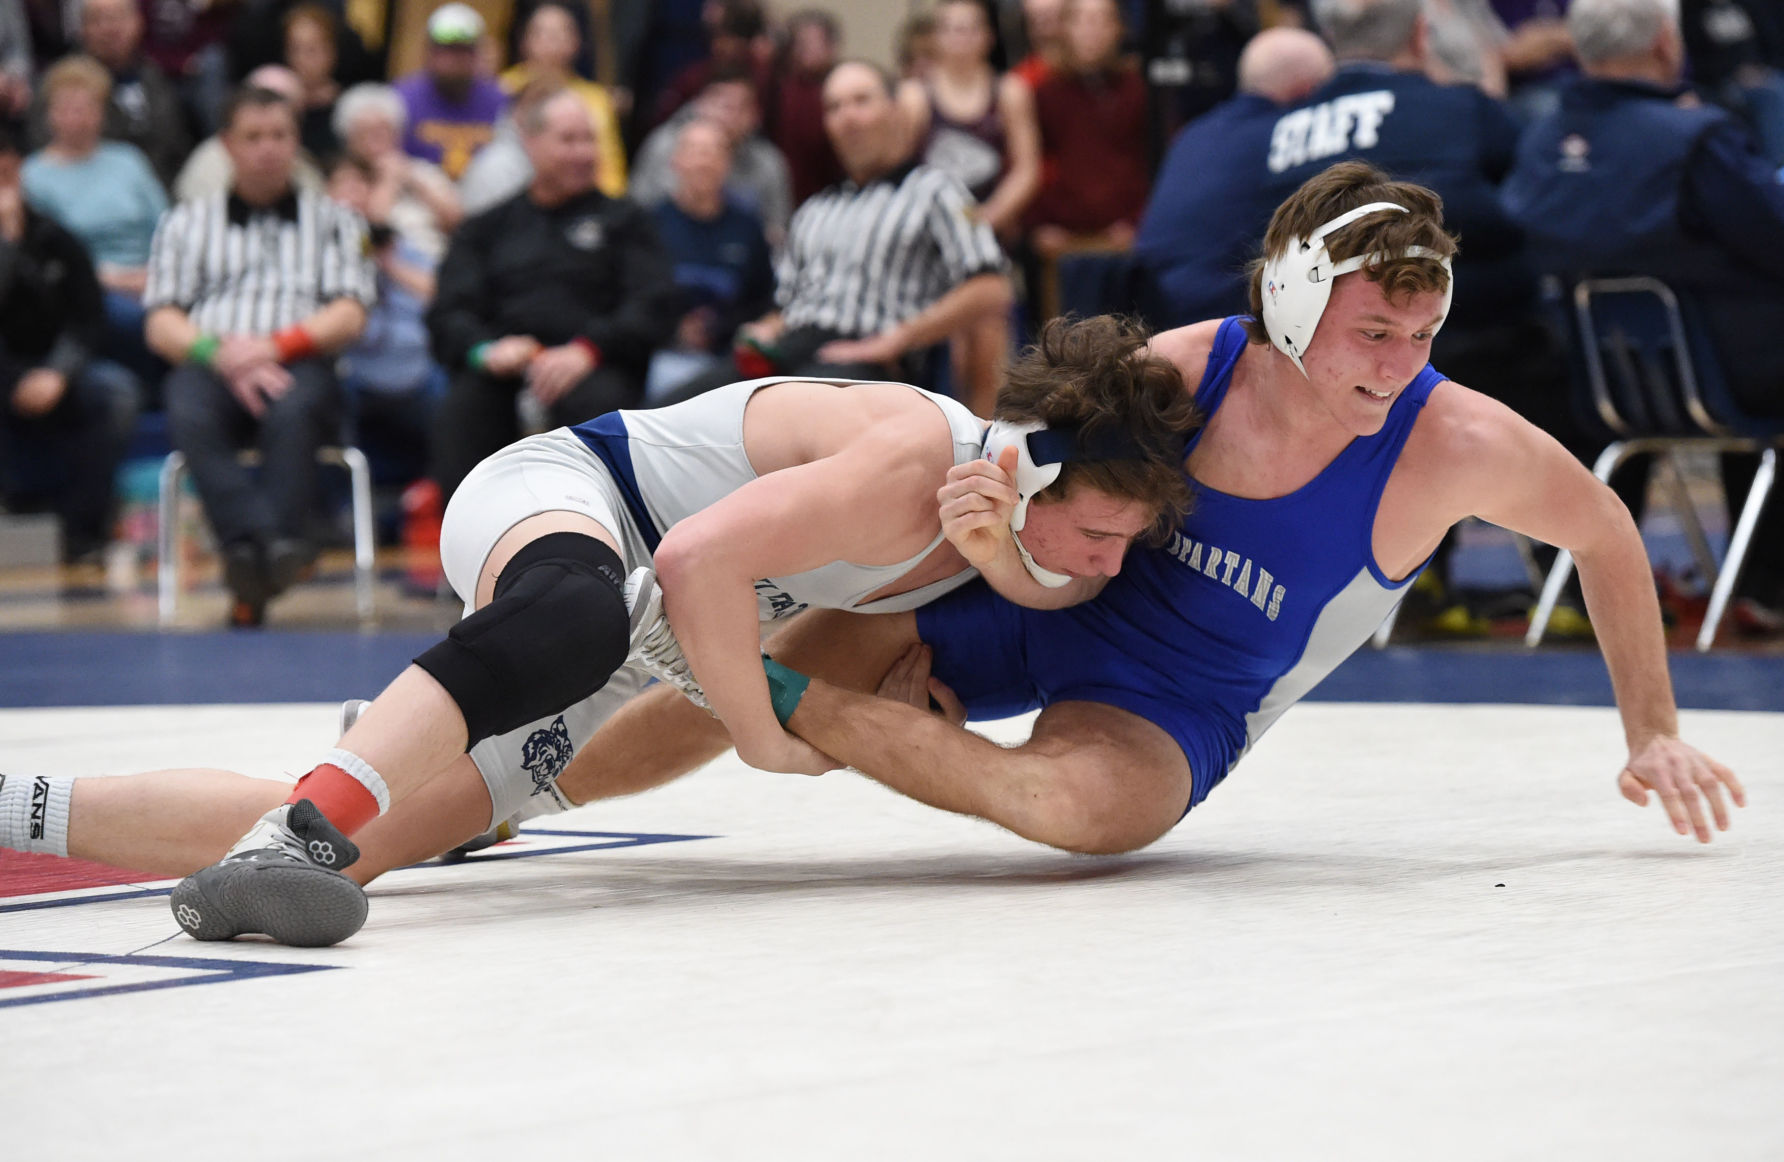 Parents Let your kids try fulfilling sport of wrestling Local Voices lancasteronline photo picture picture